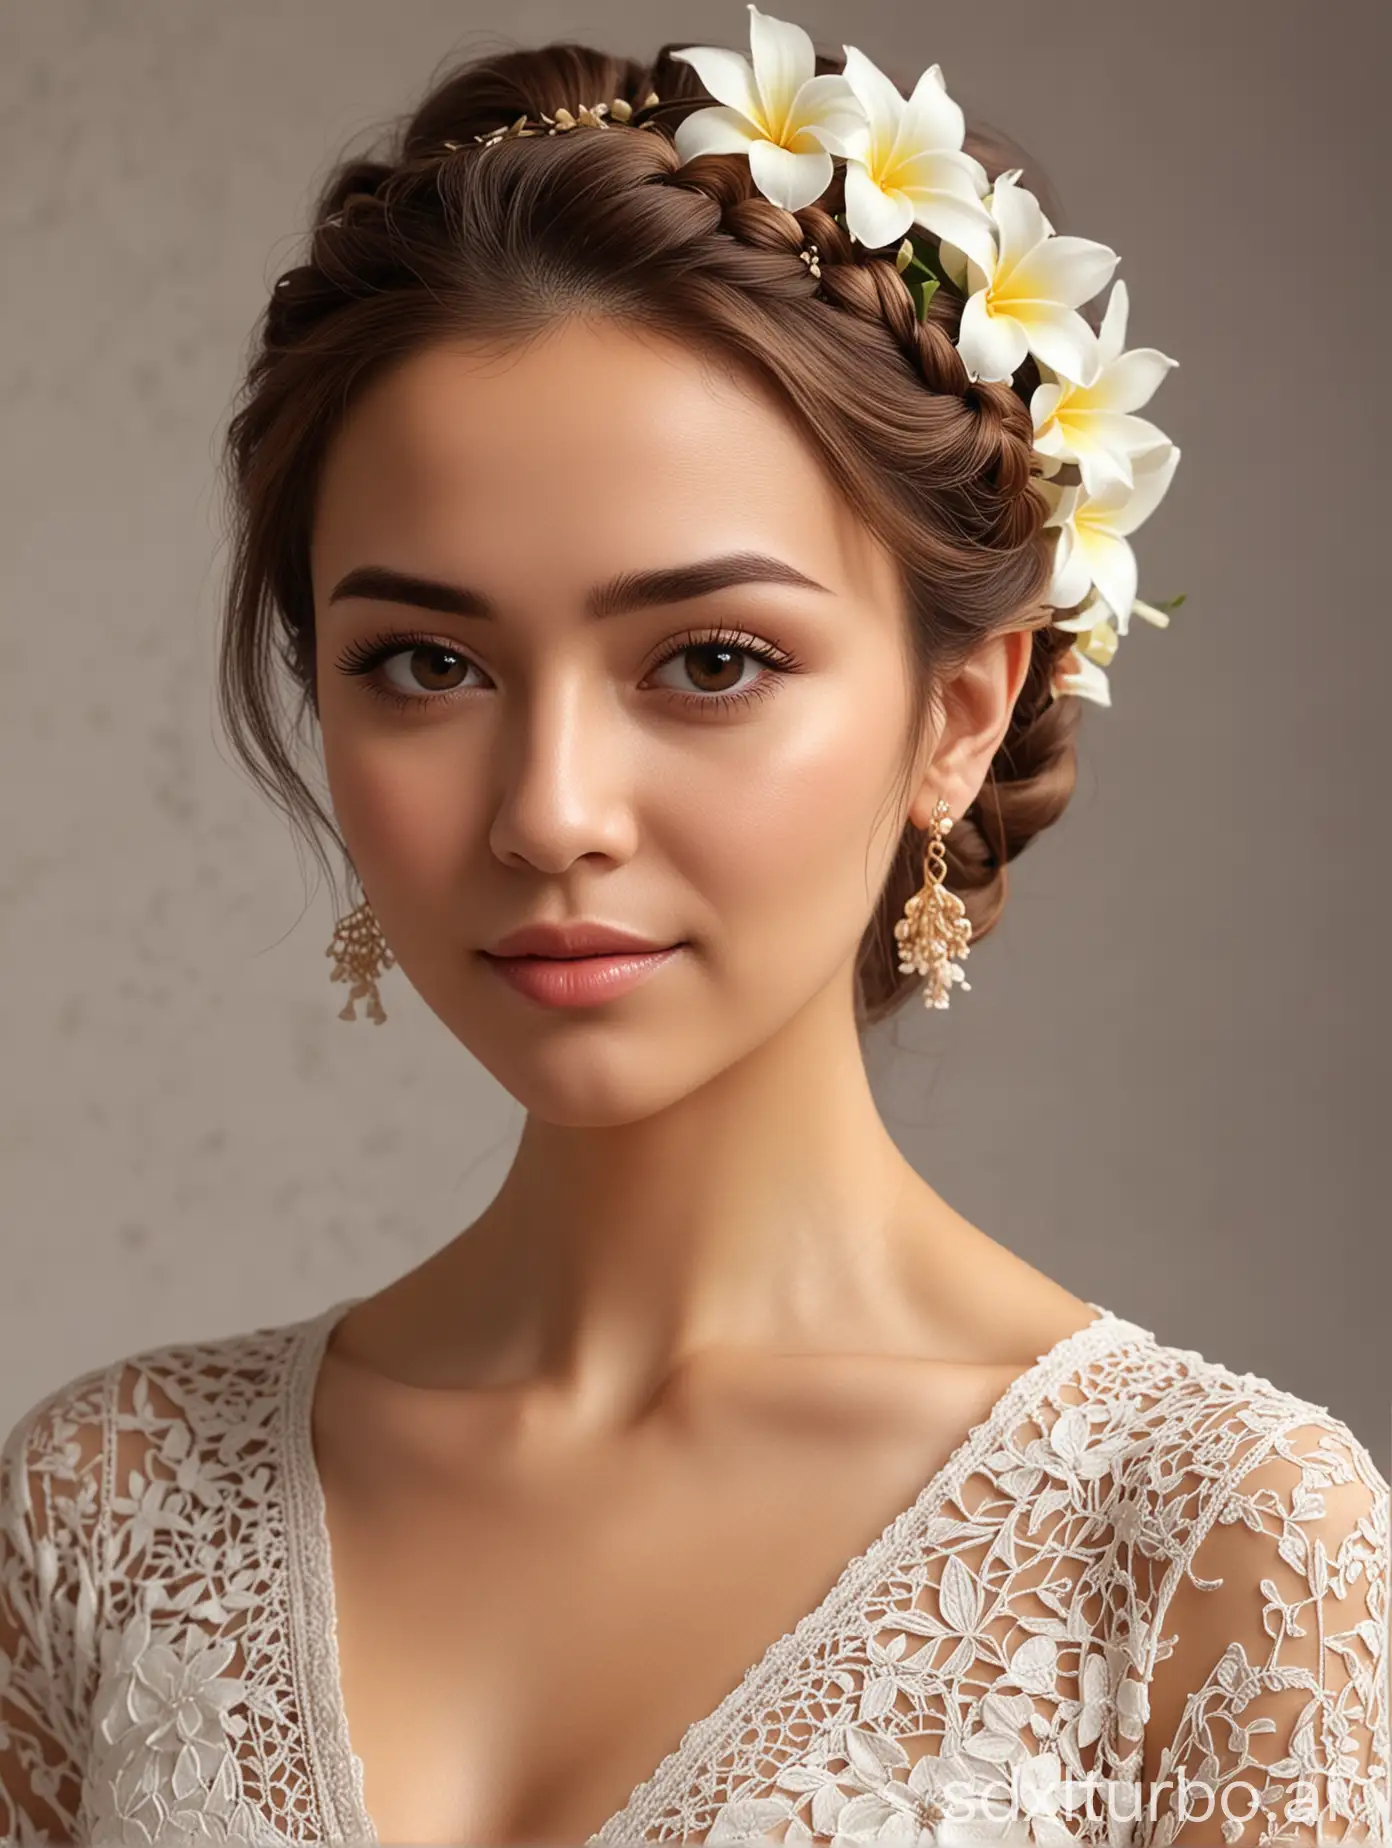 medium brown hair woman, slim body, small breast, wearing kebaya, french braid hair to the front, wearing frangipani flowers on one ear, close up, realistic